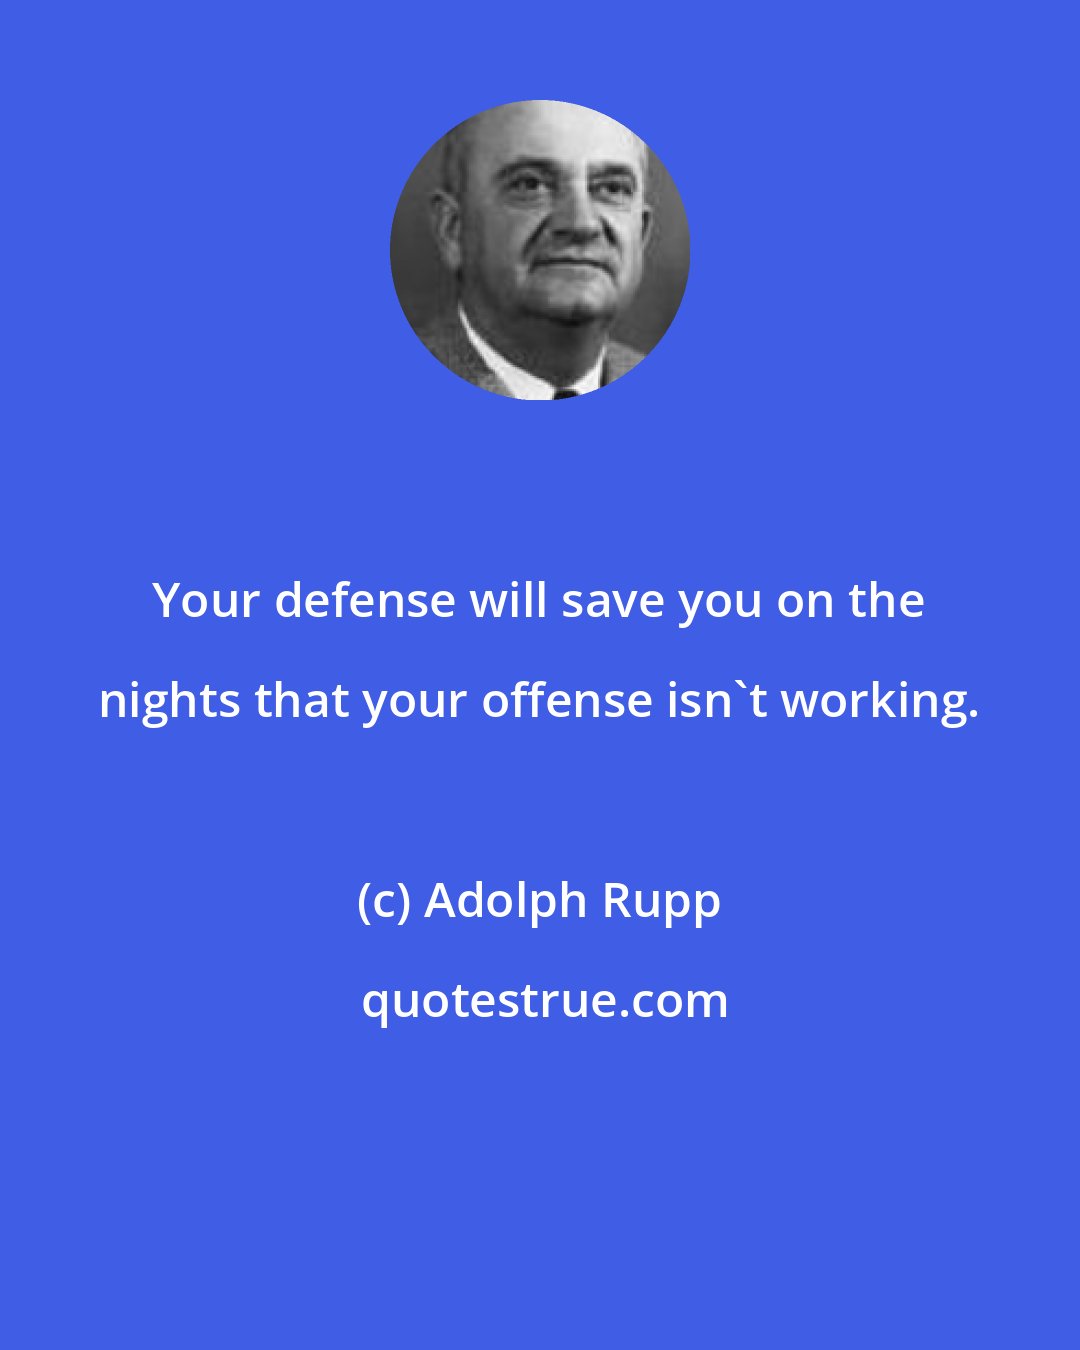 Adolph Rupp: Your defense will save you on the nights that your offense isn't working.